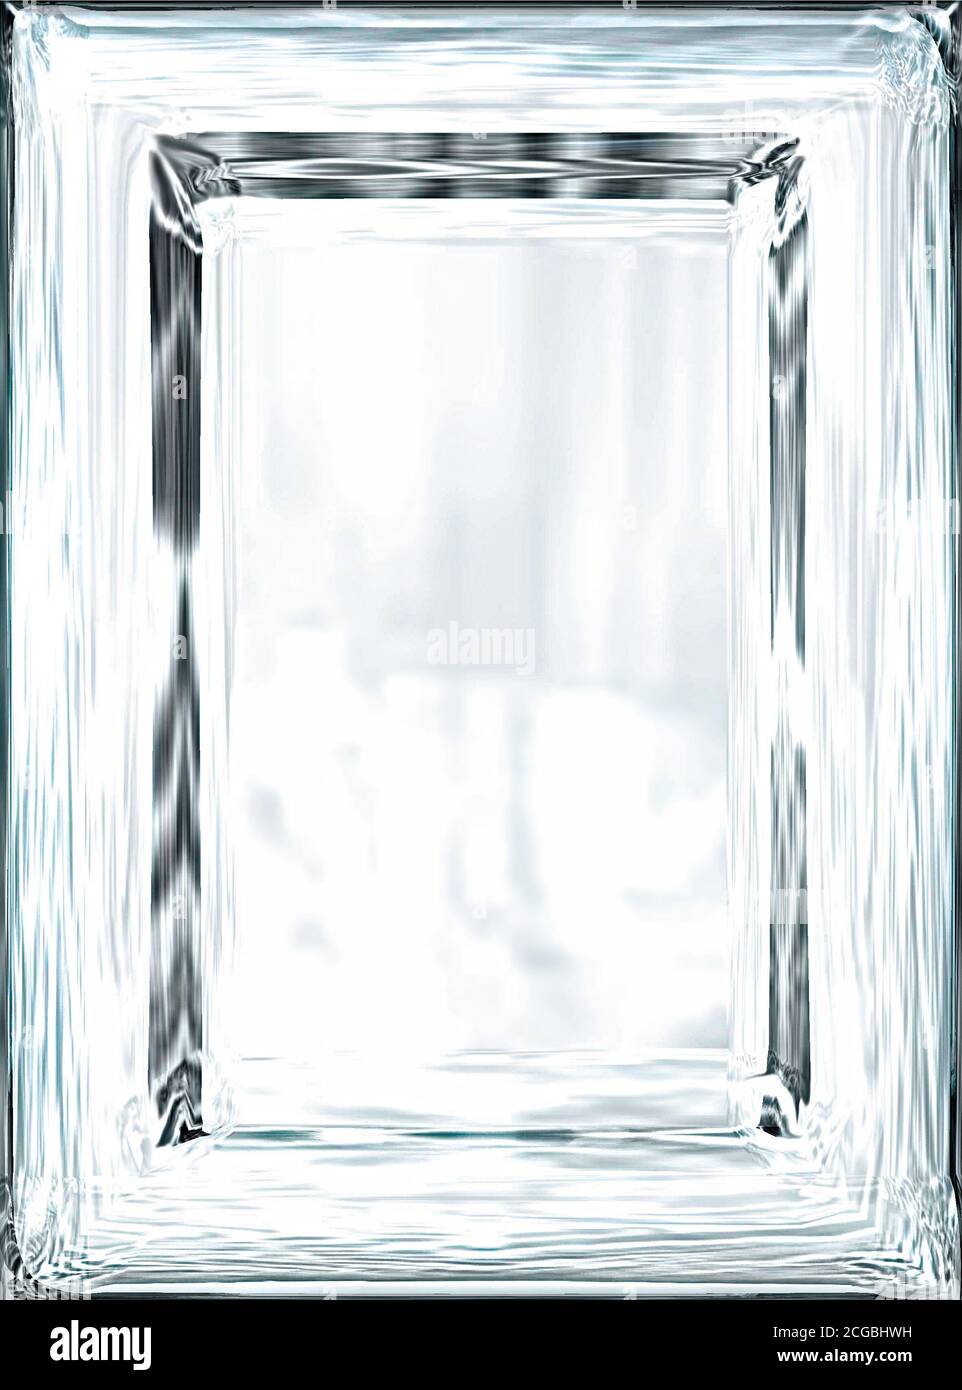 Blank glass plate texture background Stock Photo